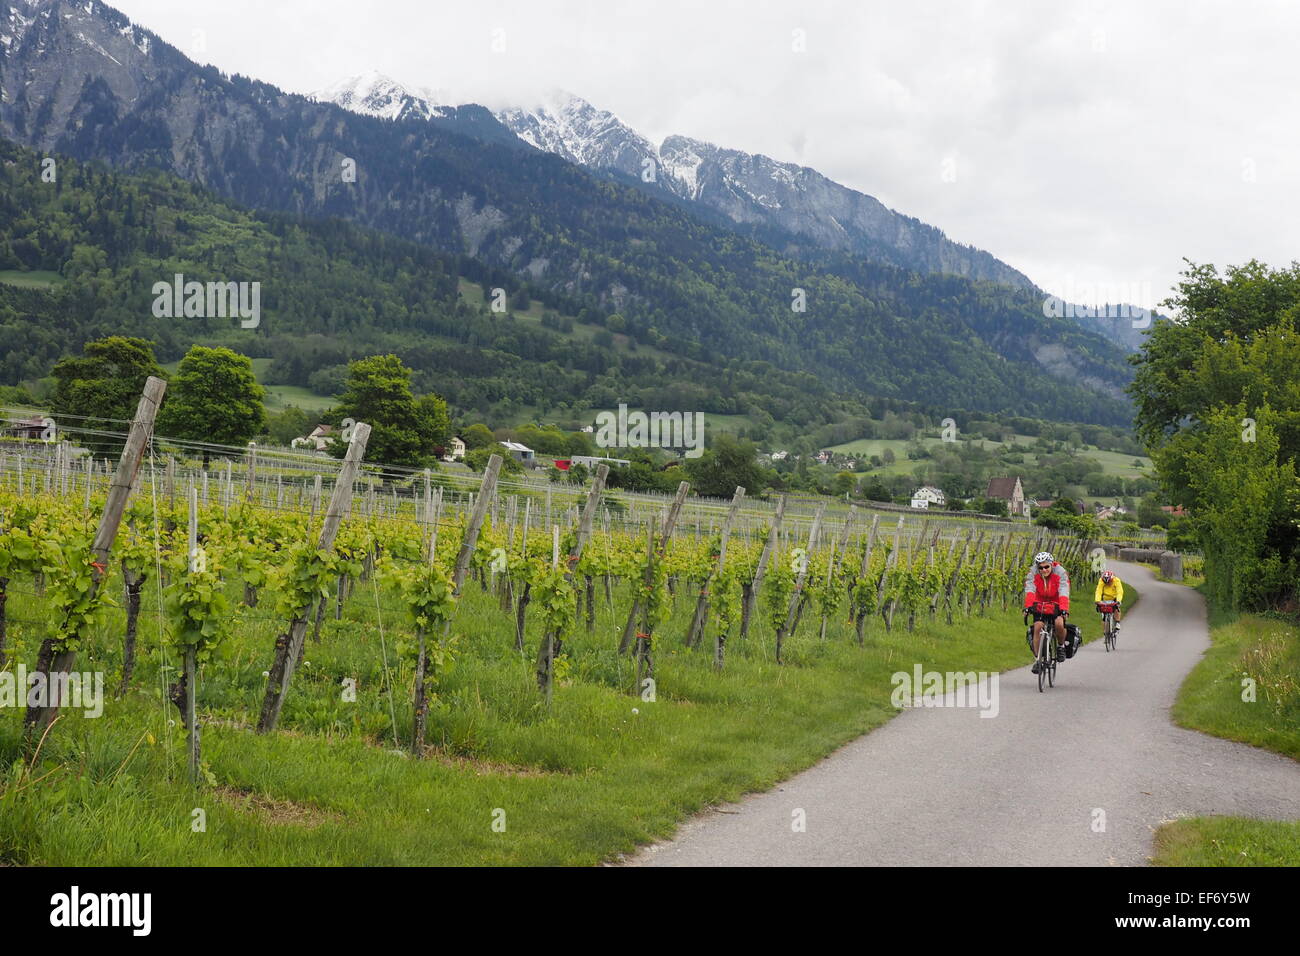 Two touring cyclists riding on a path way alongside vineyards in the Alps,Switzerland. Stock Photo